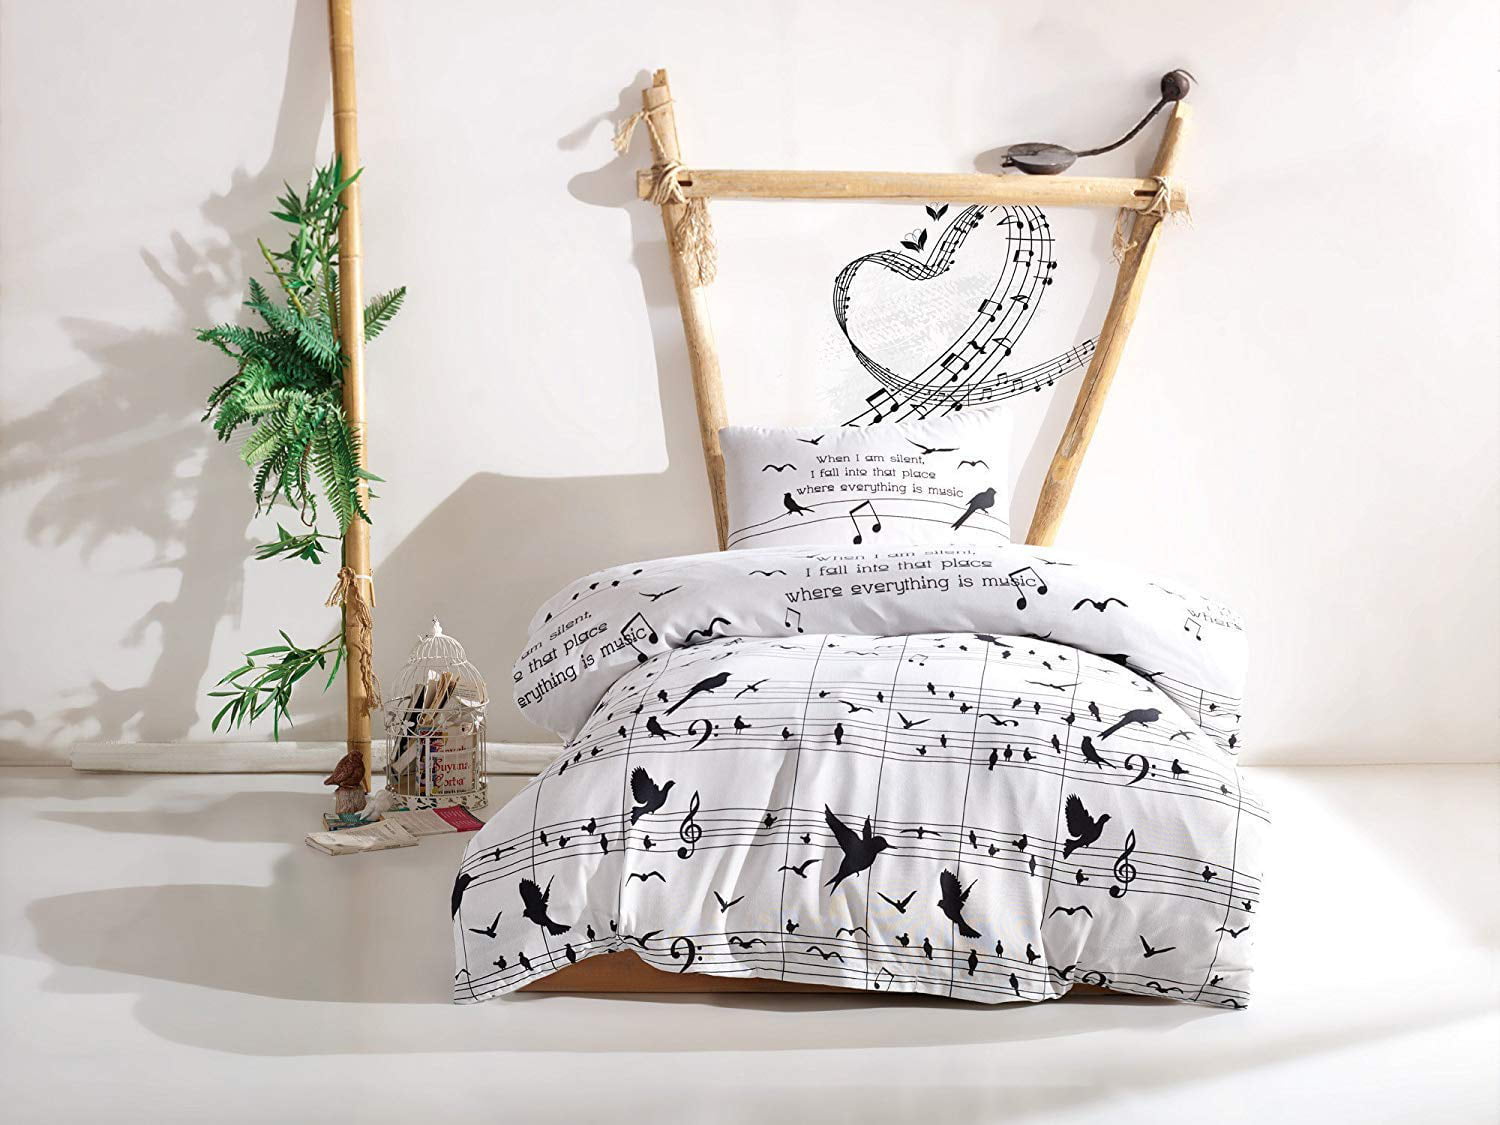 Duvet Cover 65% Cotton 35% Polyester LaModaHome Musical Duvet Cover Set Black and White Flat Sheet and Pillowcase for Single Bed Music Decor 162ELR1178 Music Notes are Dancing Set of 3